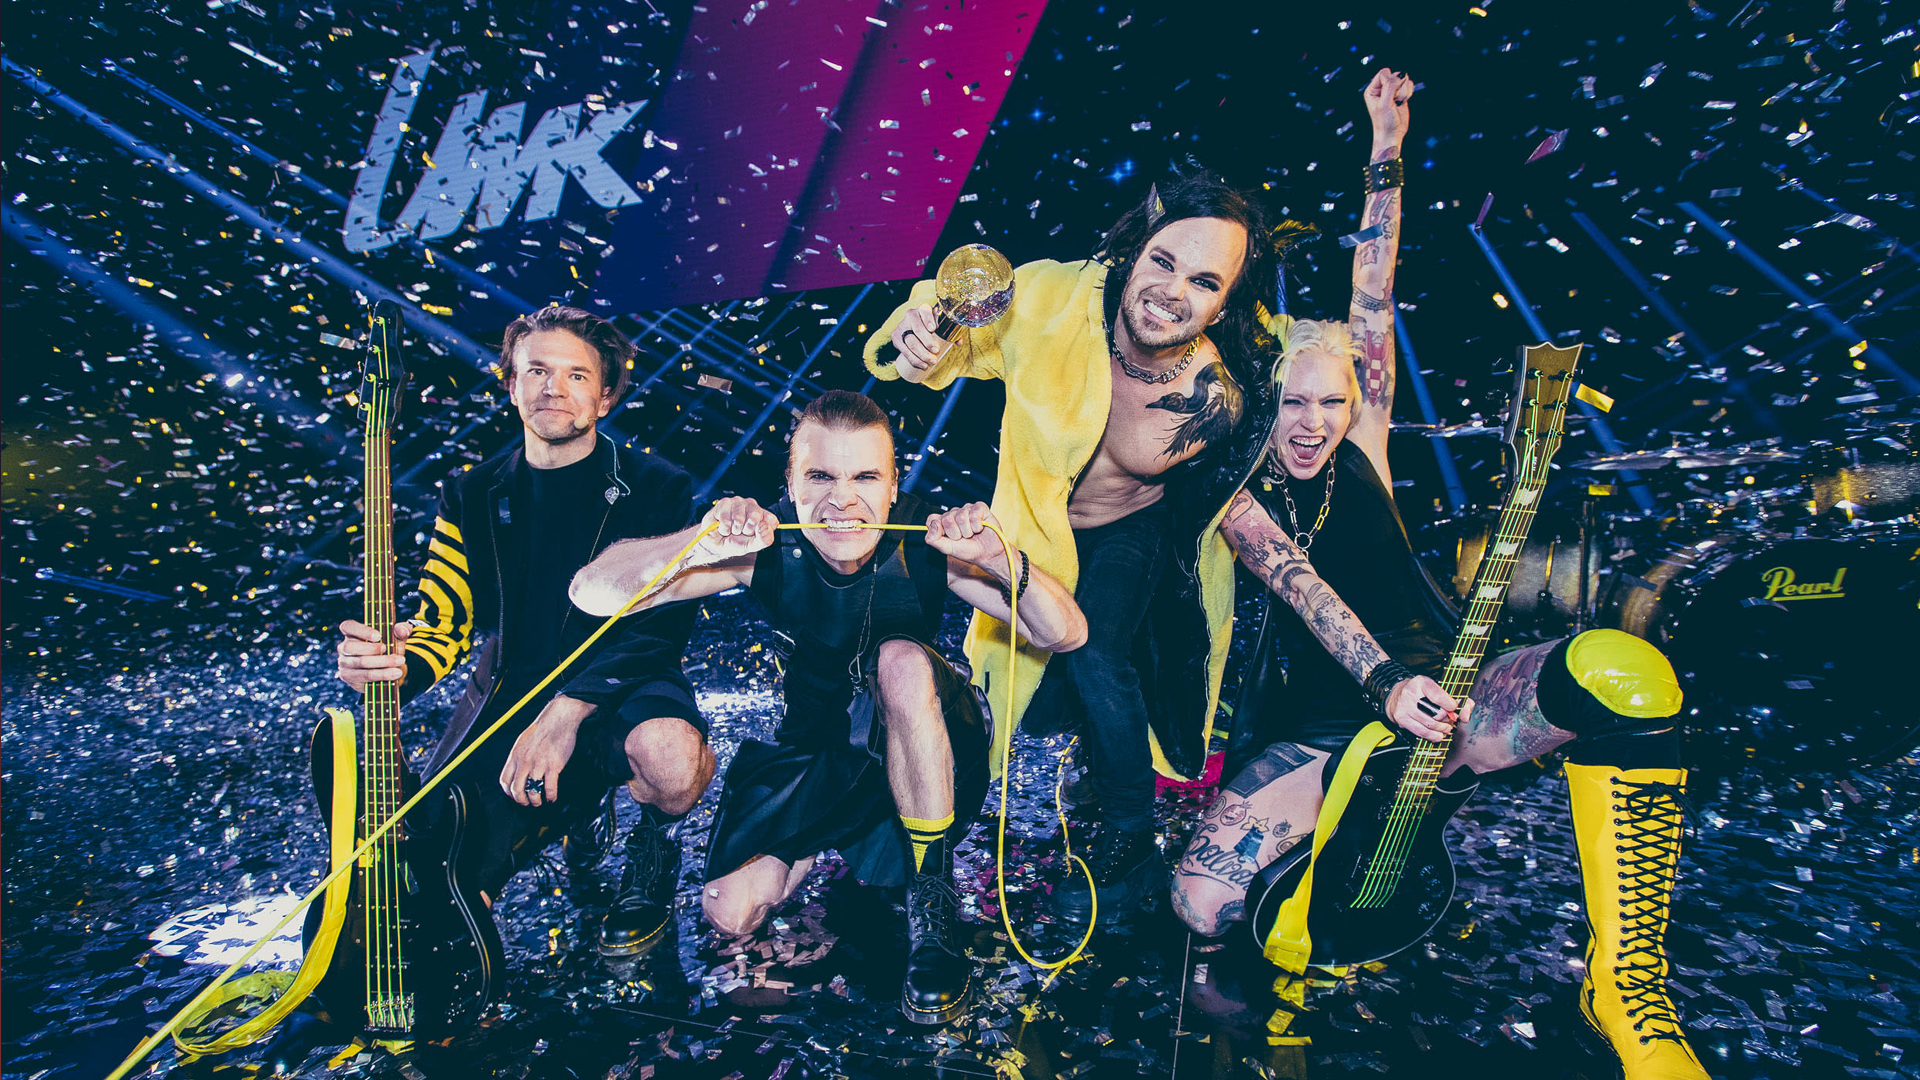 Finland: The Rasmus is planning a grand performance